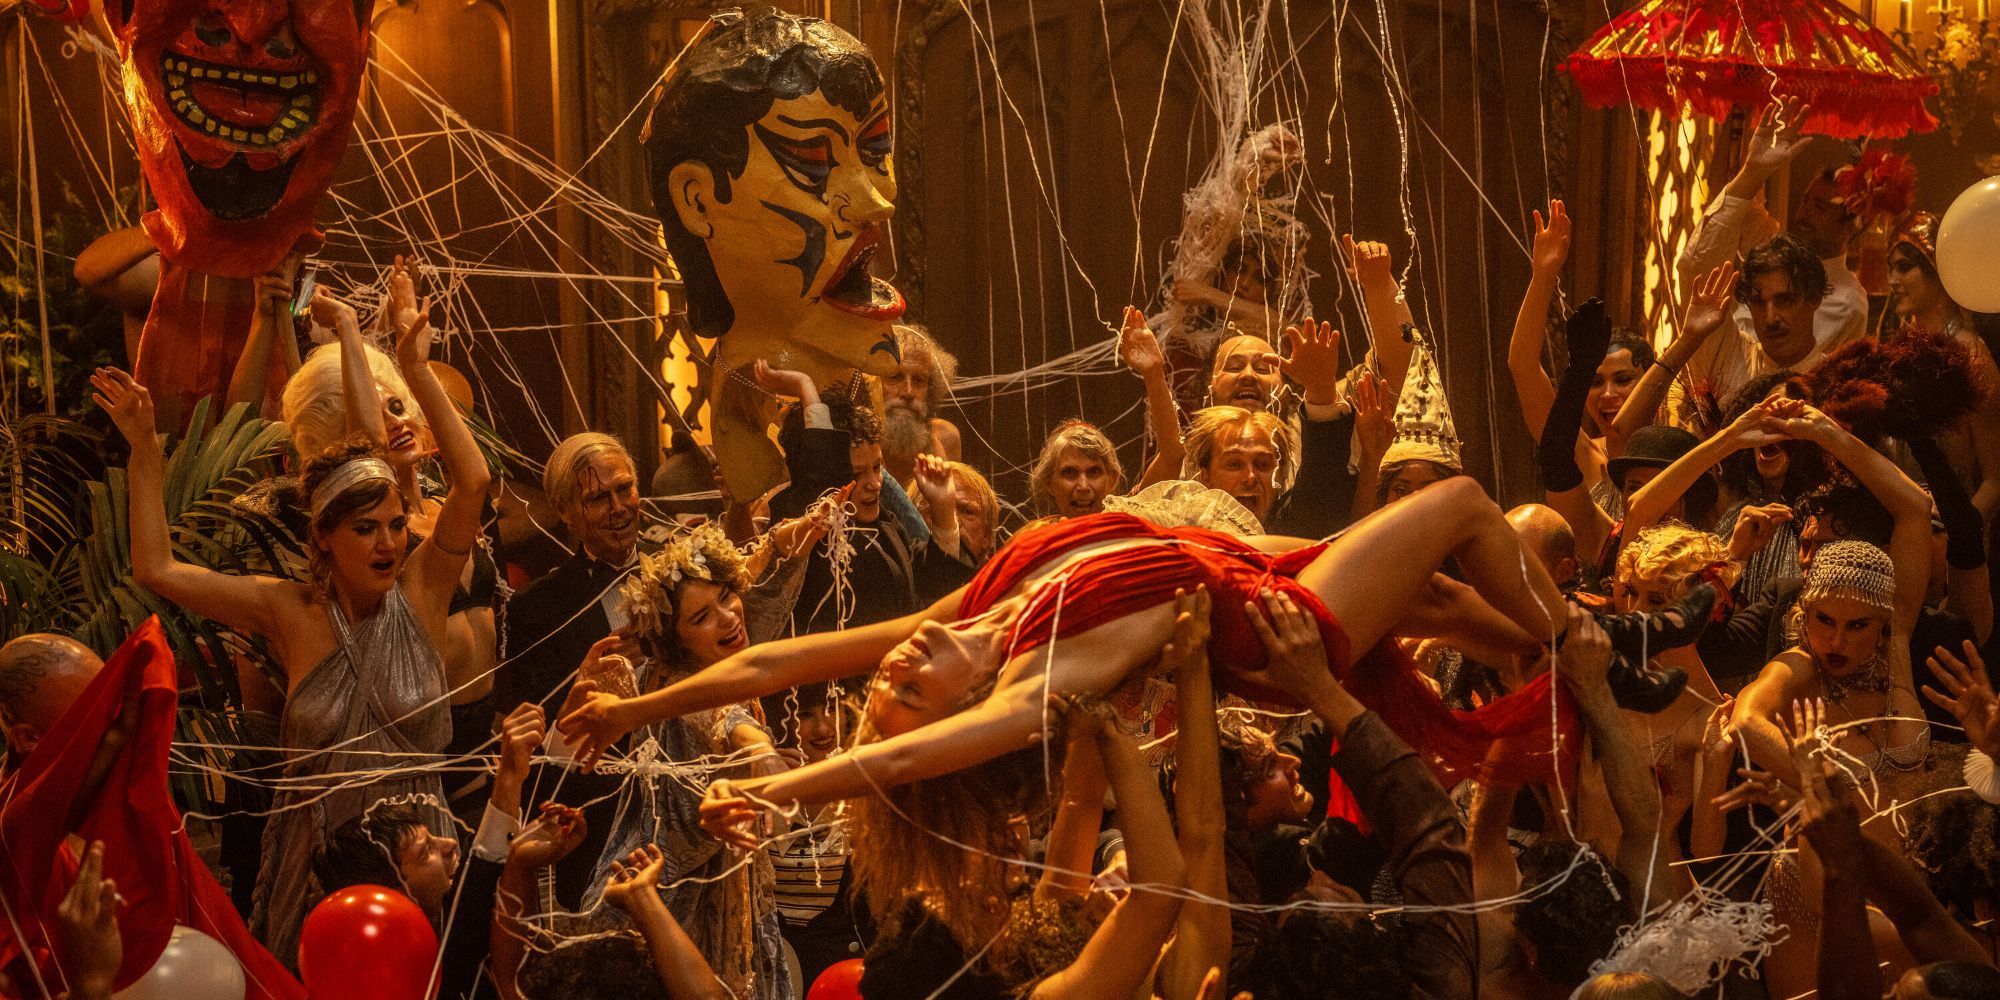 Margot Robbie as Nellie LaRoy being lifted by a crowd at a party in Babylon